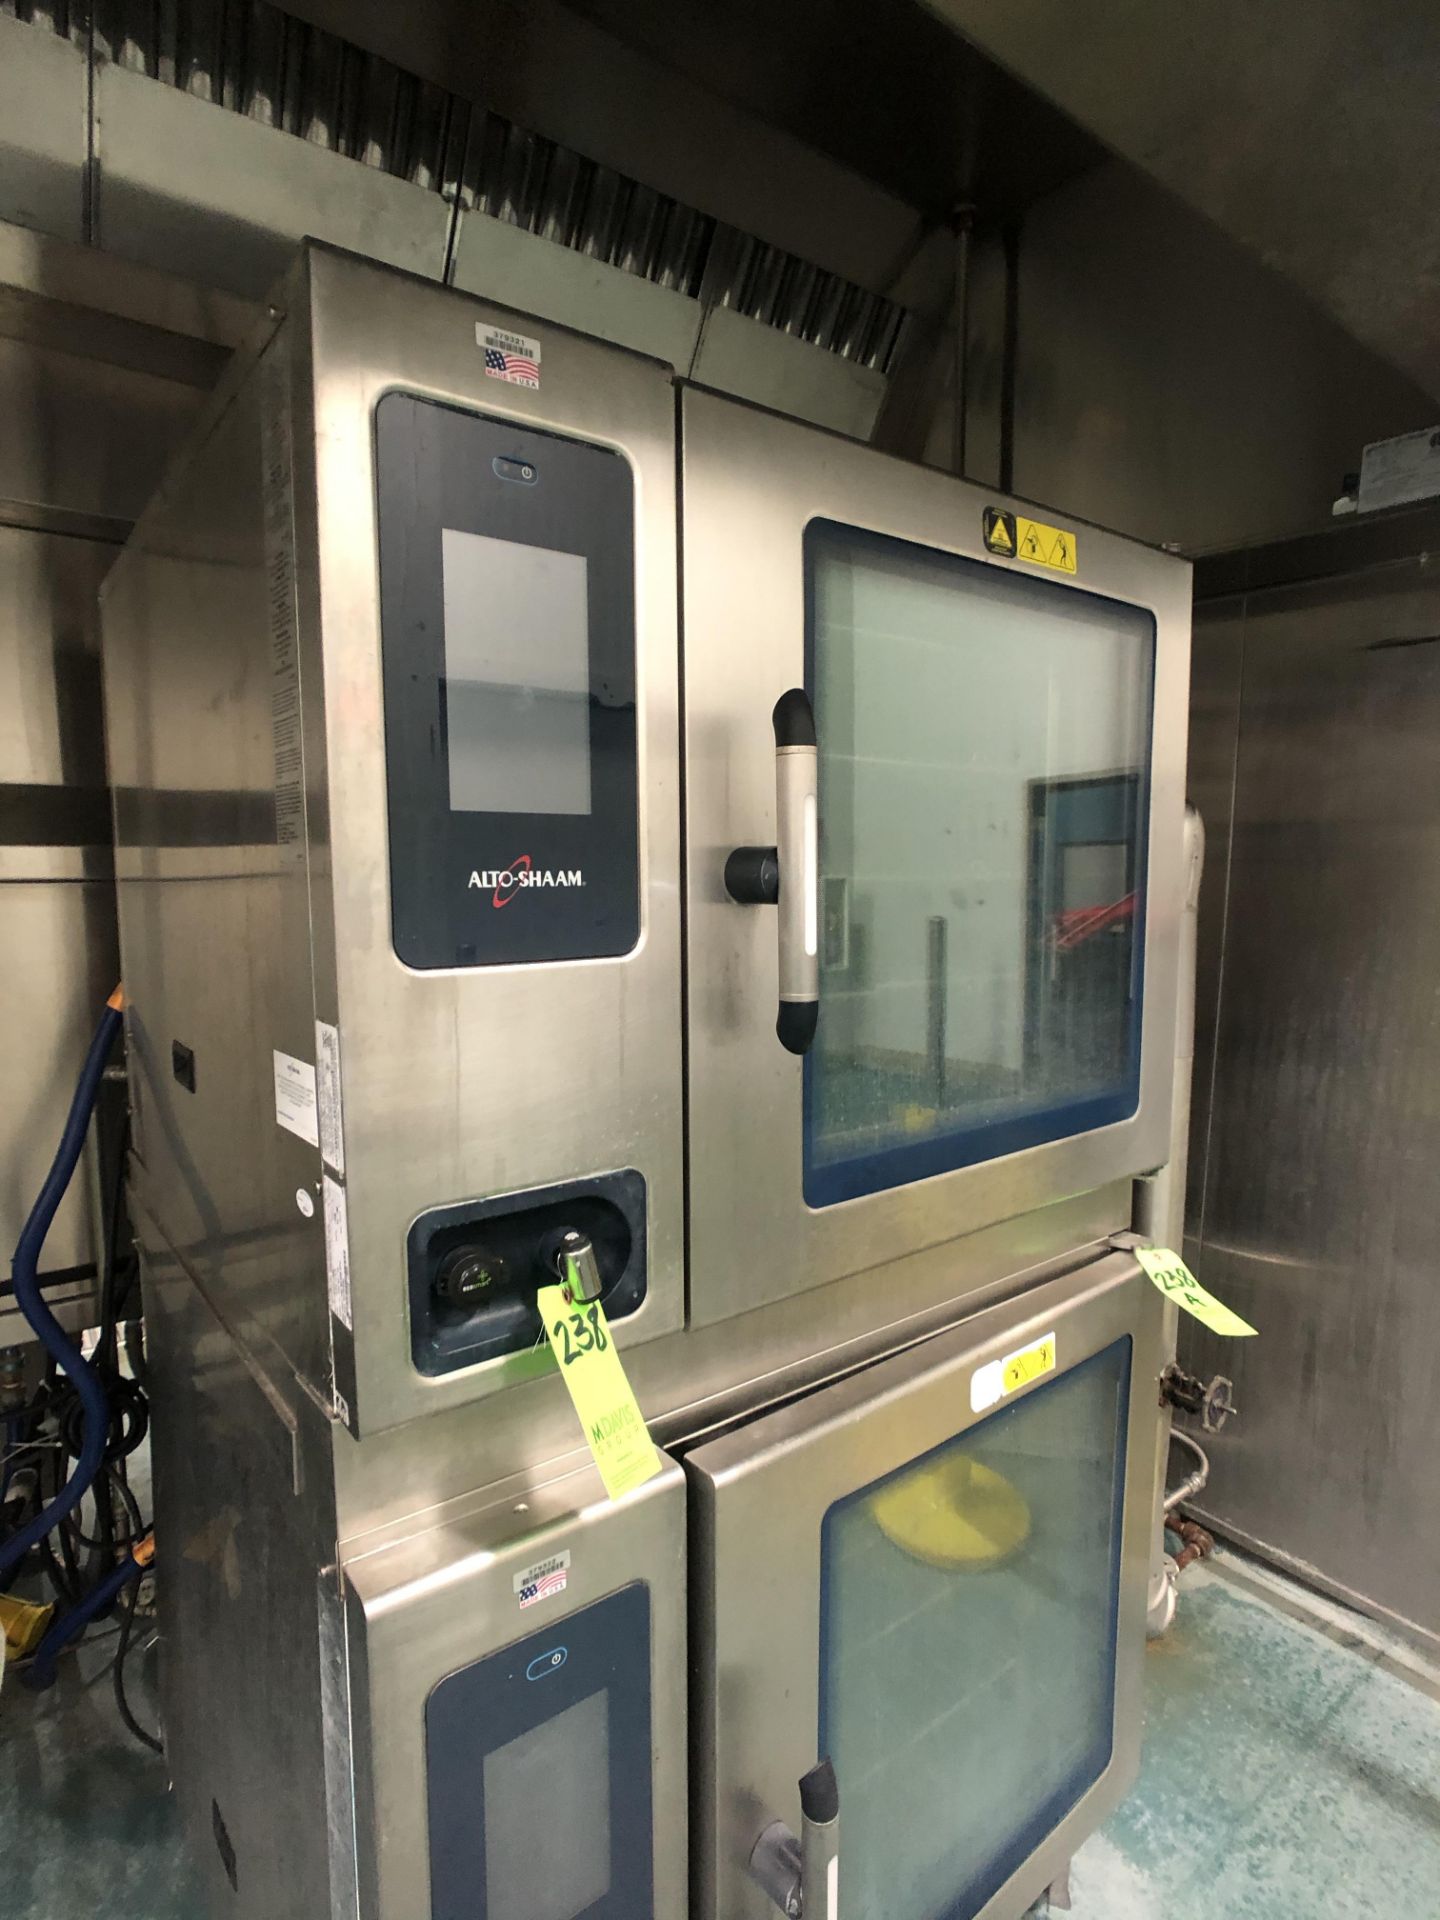 2016 ALTO-SHAAM COMBI OVENS, MODEL CTP7-20 - Image 5 of 10